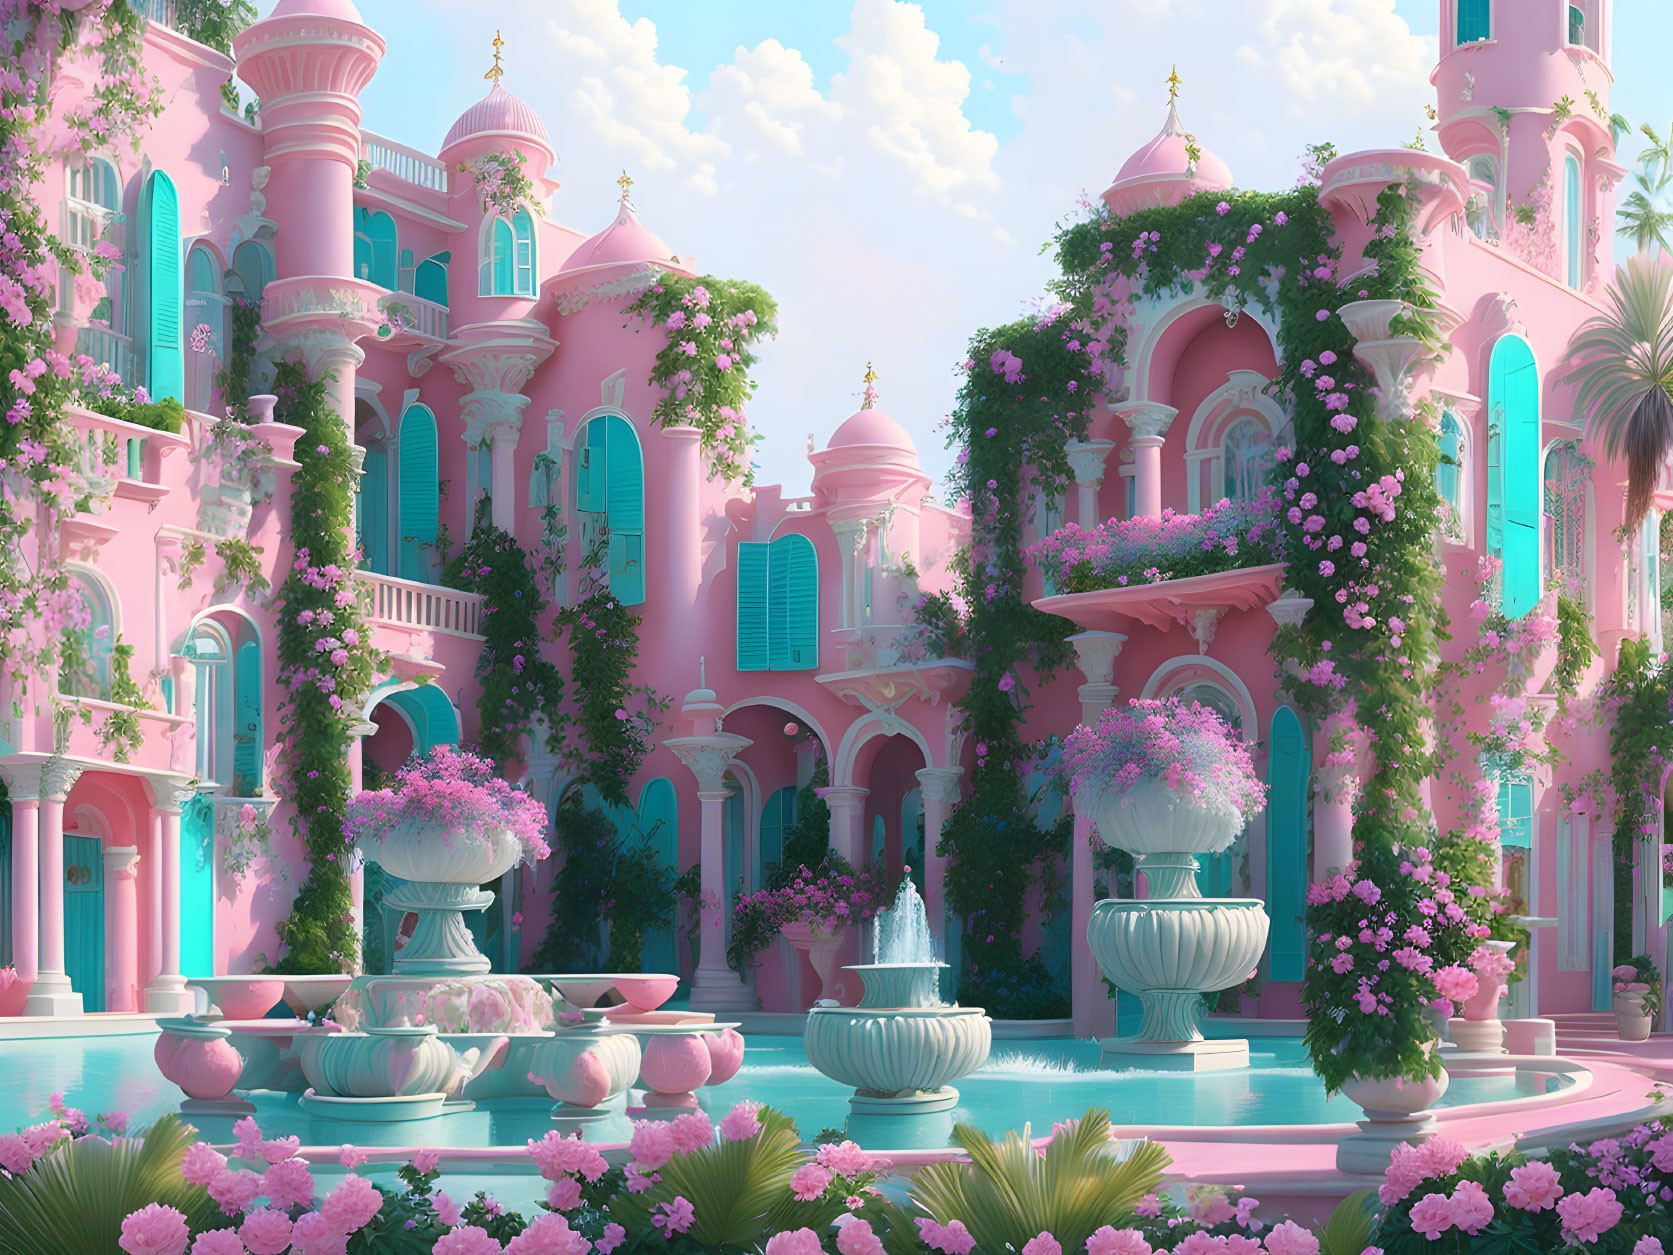 Pink palace with ornate towers in lush garden setting